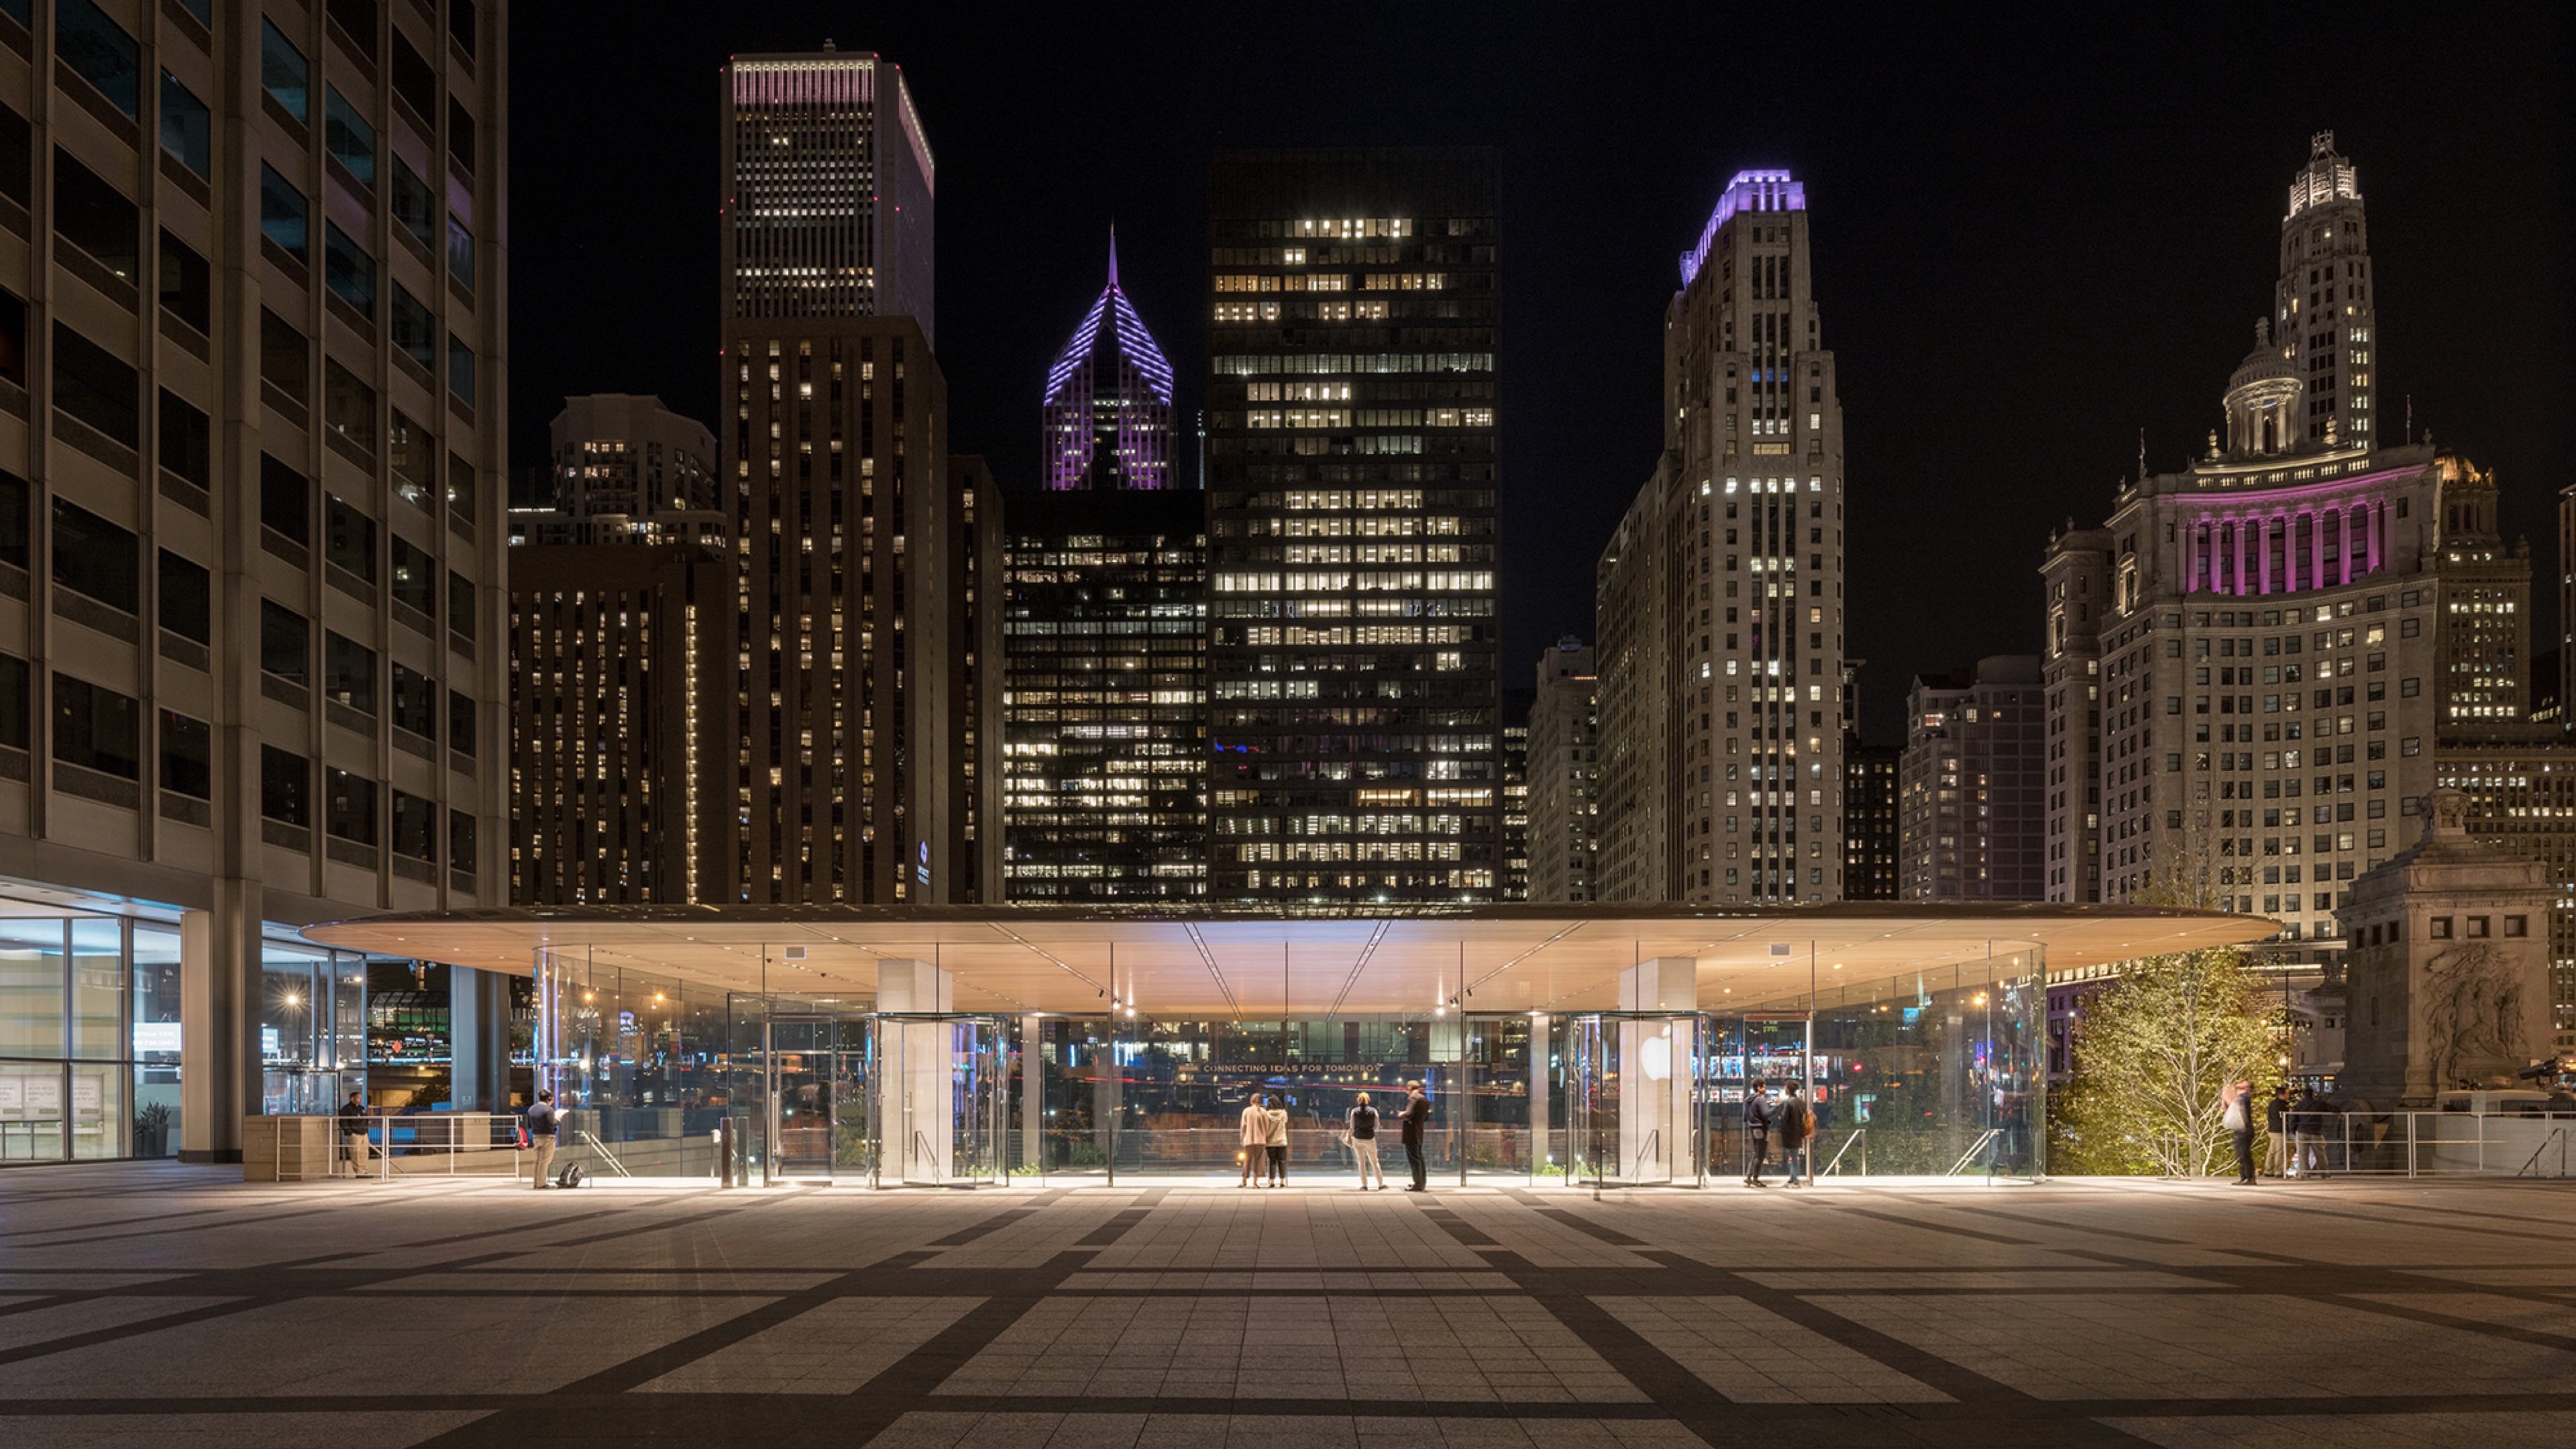 Gallery of Apple Store Michigan Avenue, Chicago / Foster + Partners - 2